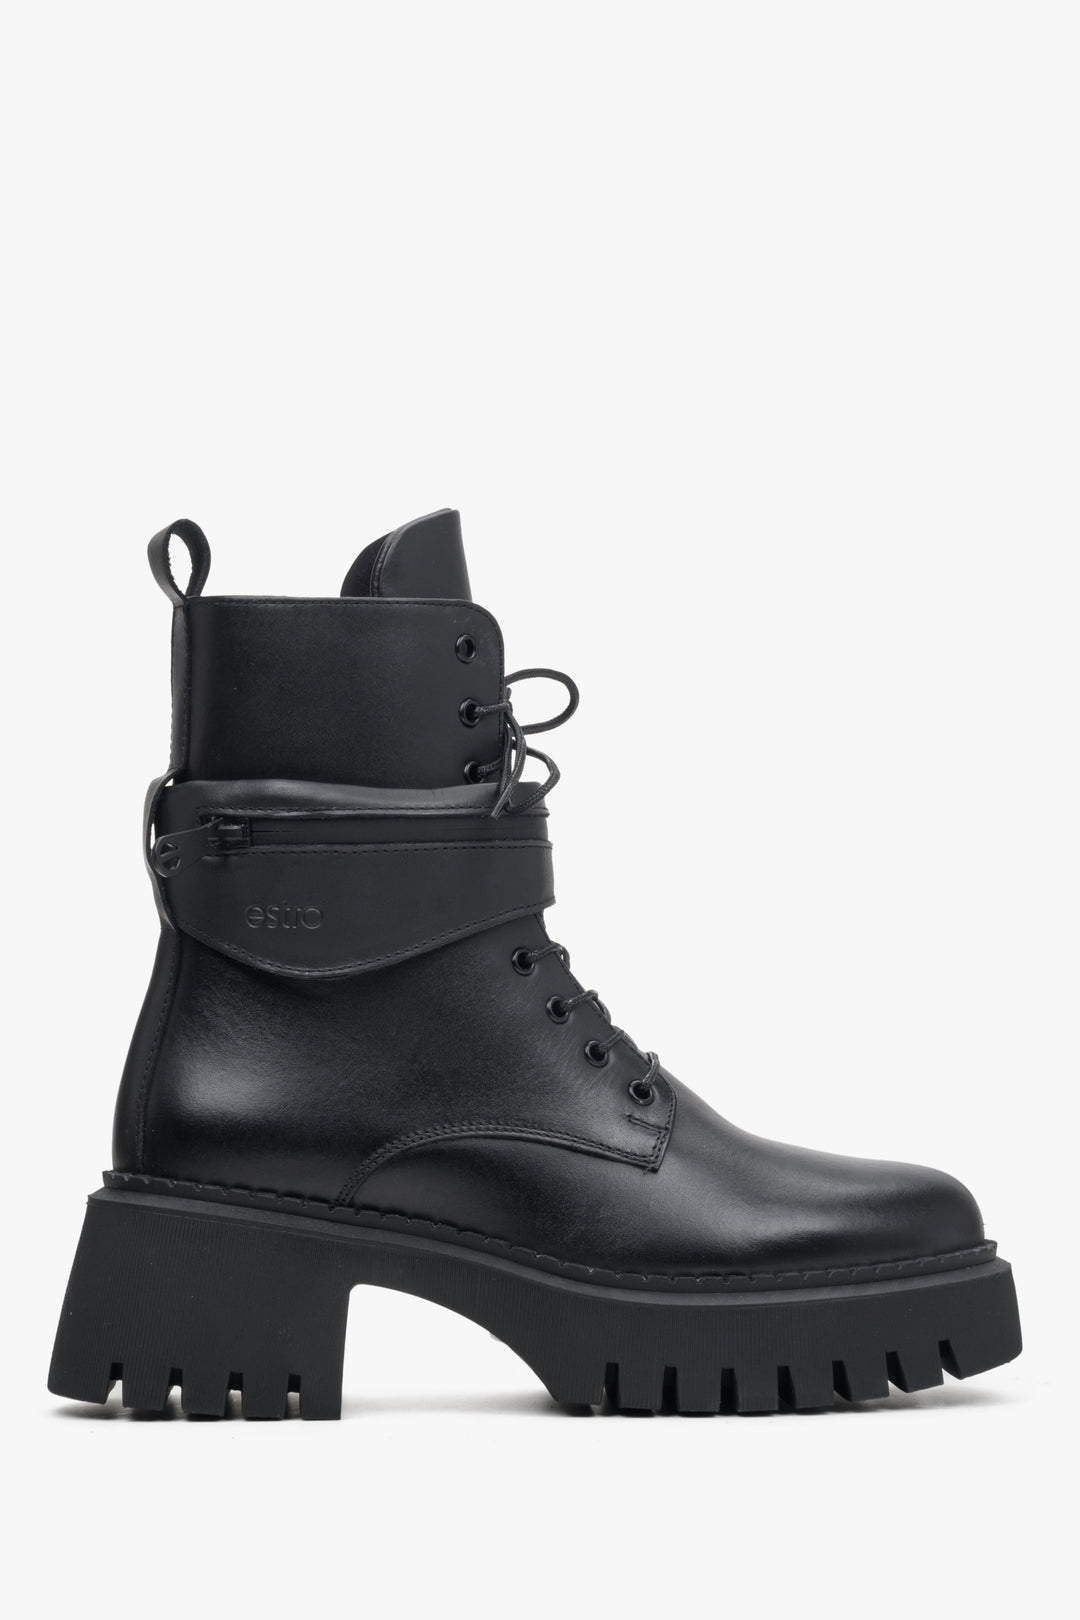 Women's Black Boots made of Genuine Leather for Winter Estro ER00113516.